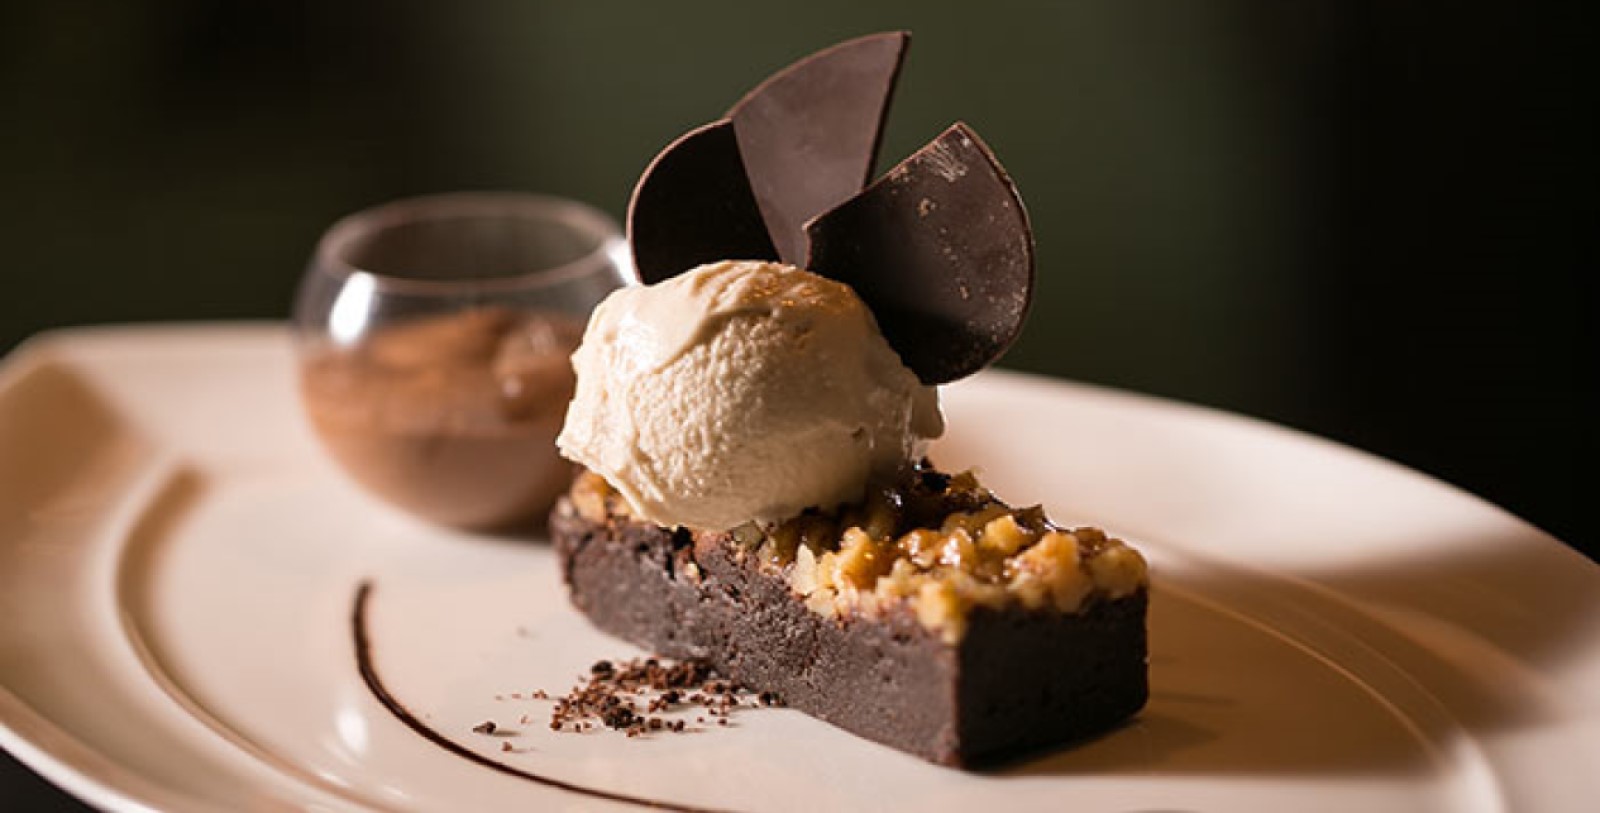 Taste the Palmer Hotel Brownie, whose current recipe is the same as the very first brownie, created right in the Palmer House Kitchen in the late 19th century.